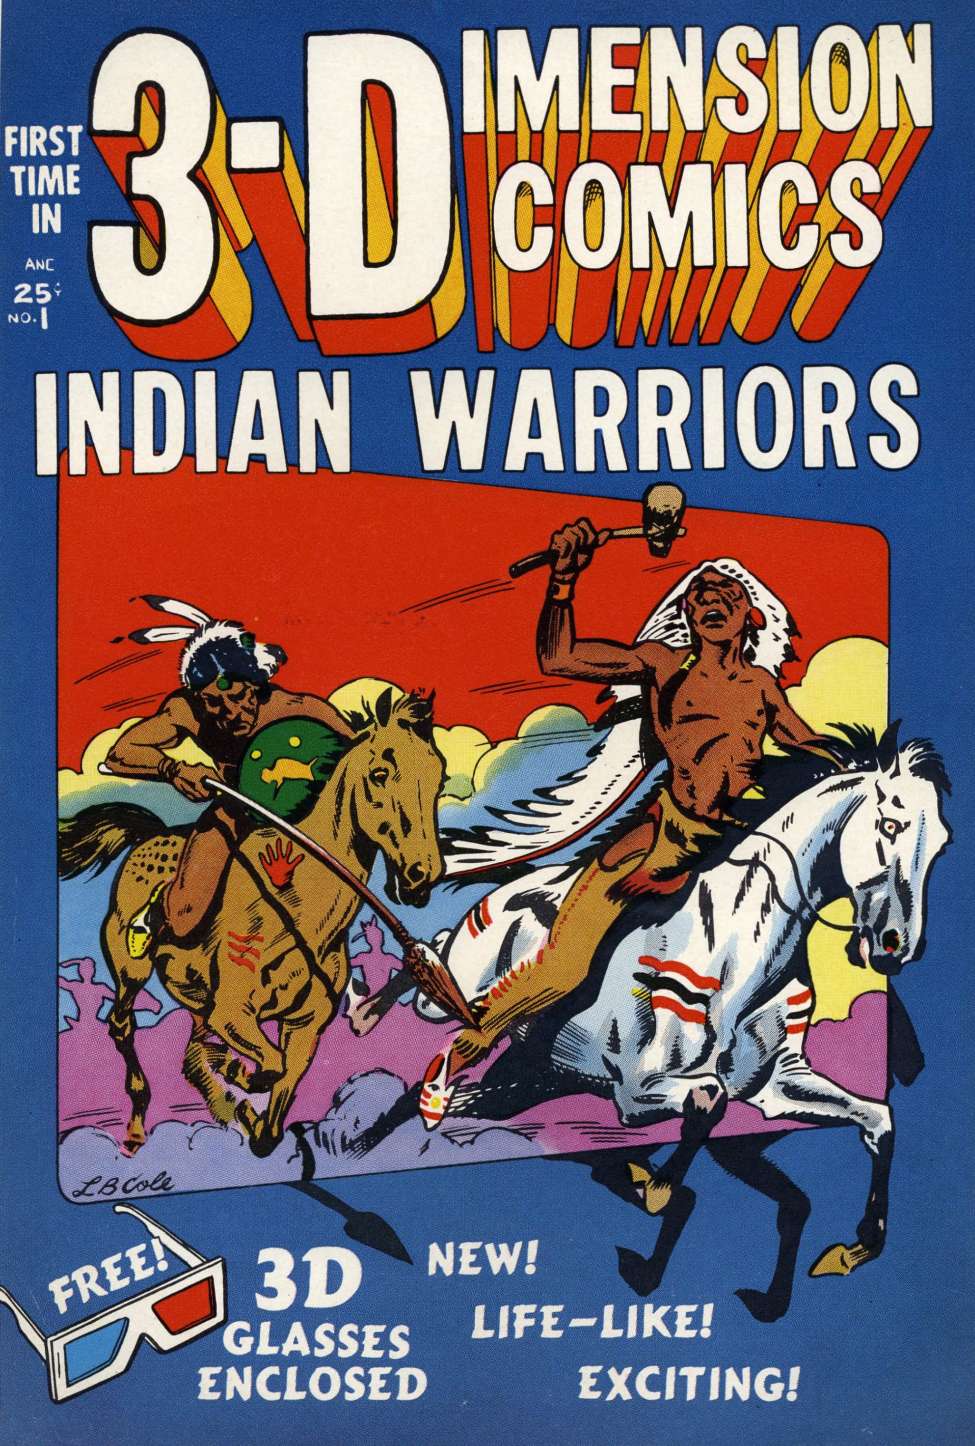 Comic Book Cover For Indian Warriors 3-D